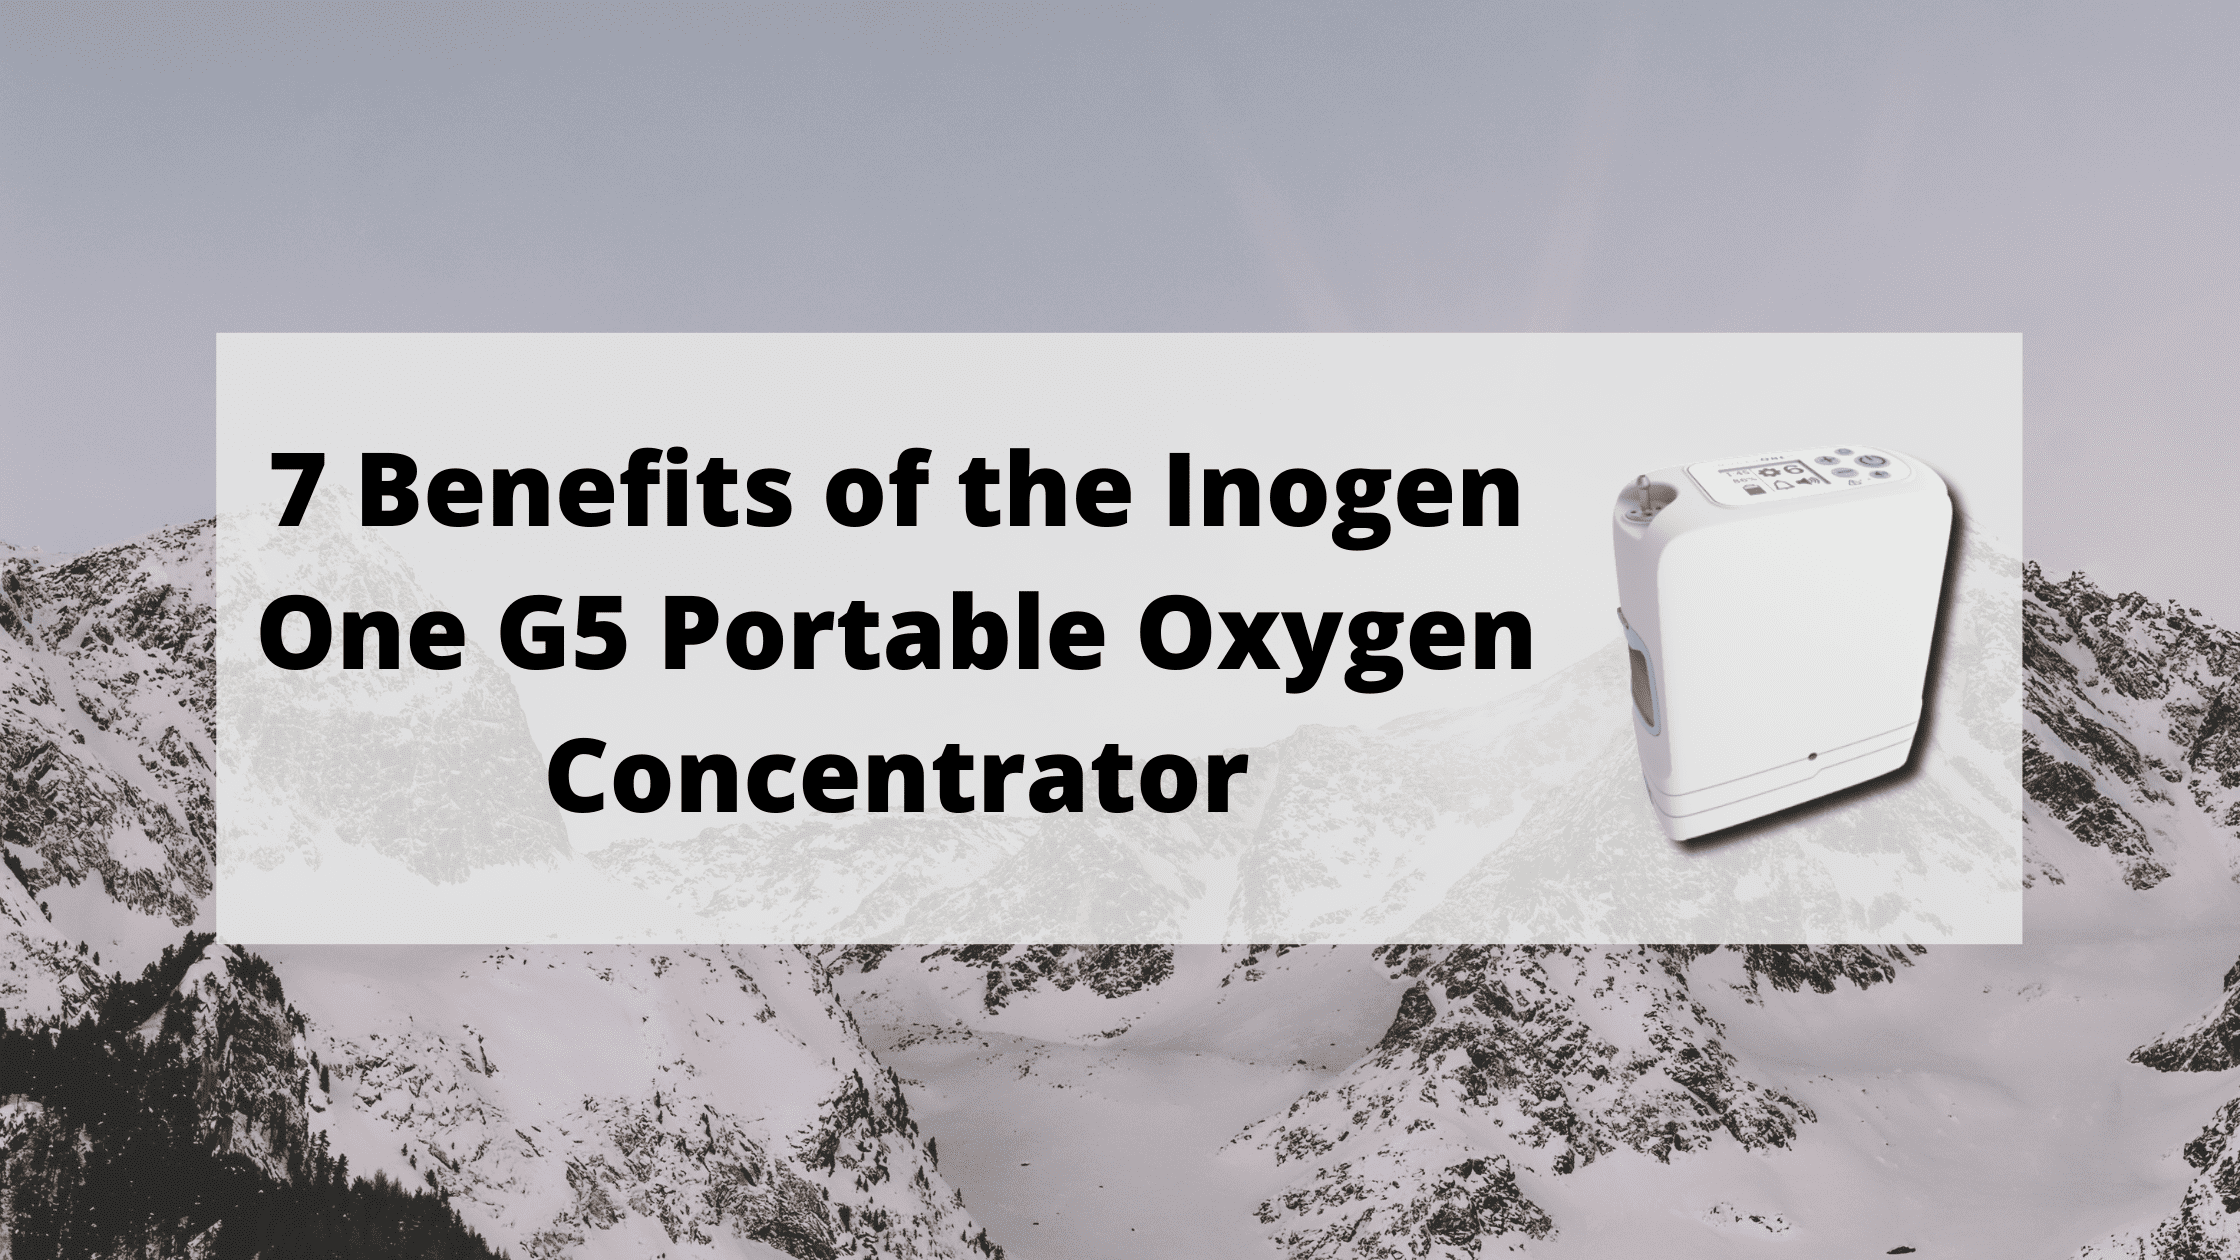 7 Benefits of the Inogen One G5 Portable Oxygen Concentrator